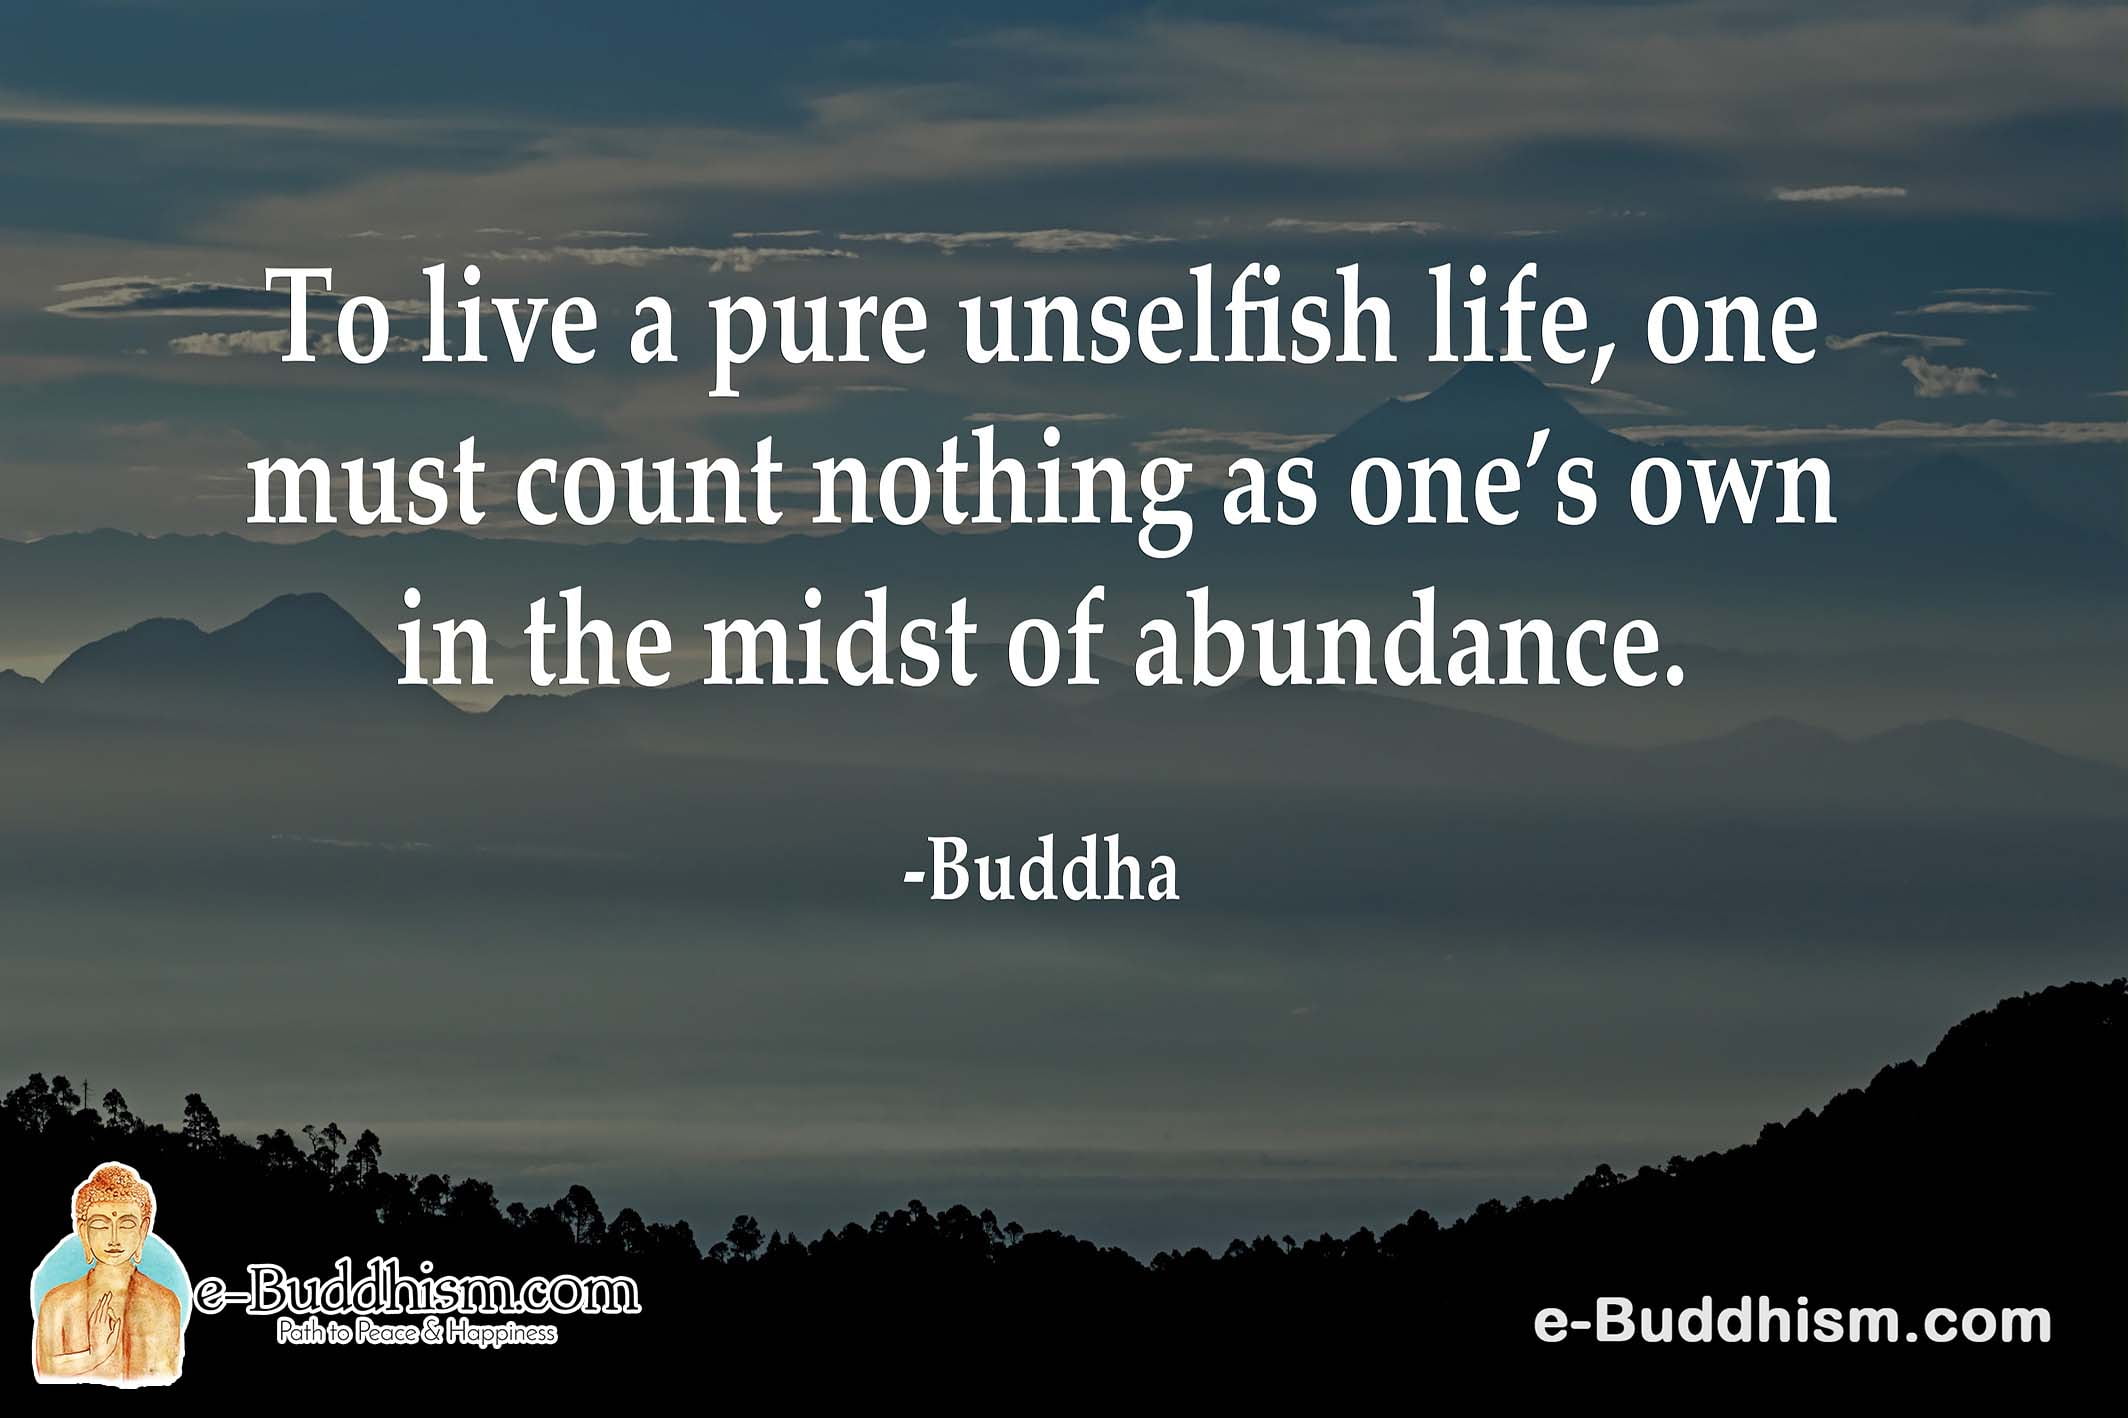 To live a pure unselfish life, one must count nothing as one's own in the midst of abundance. -Buddha